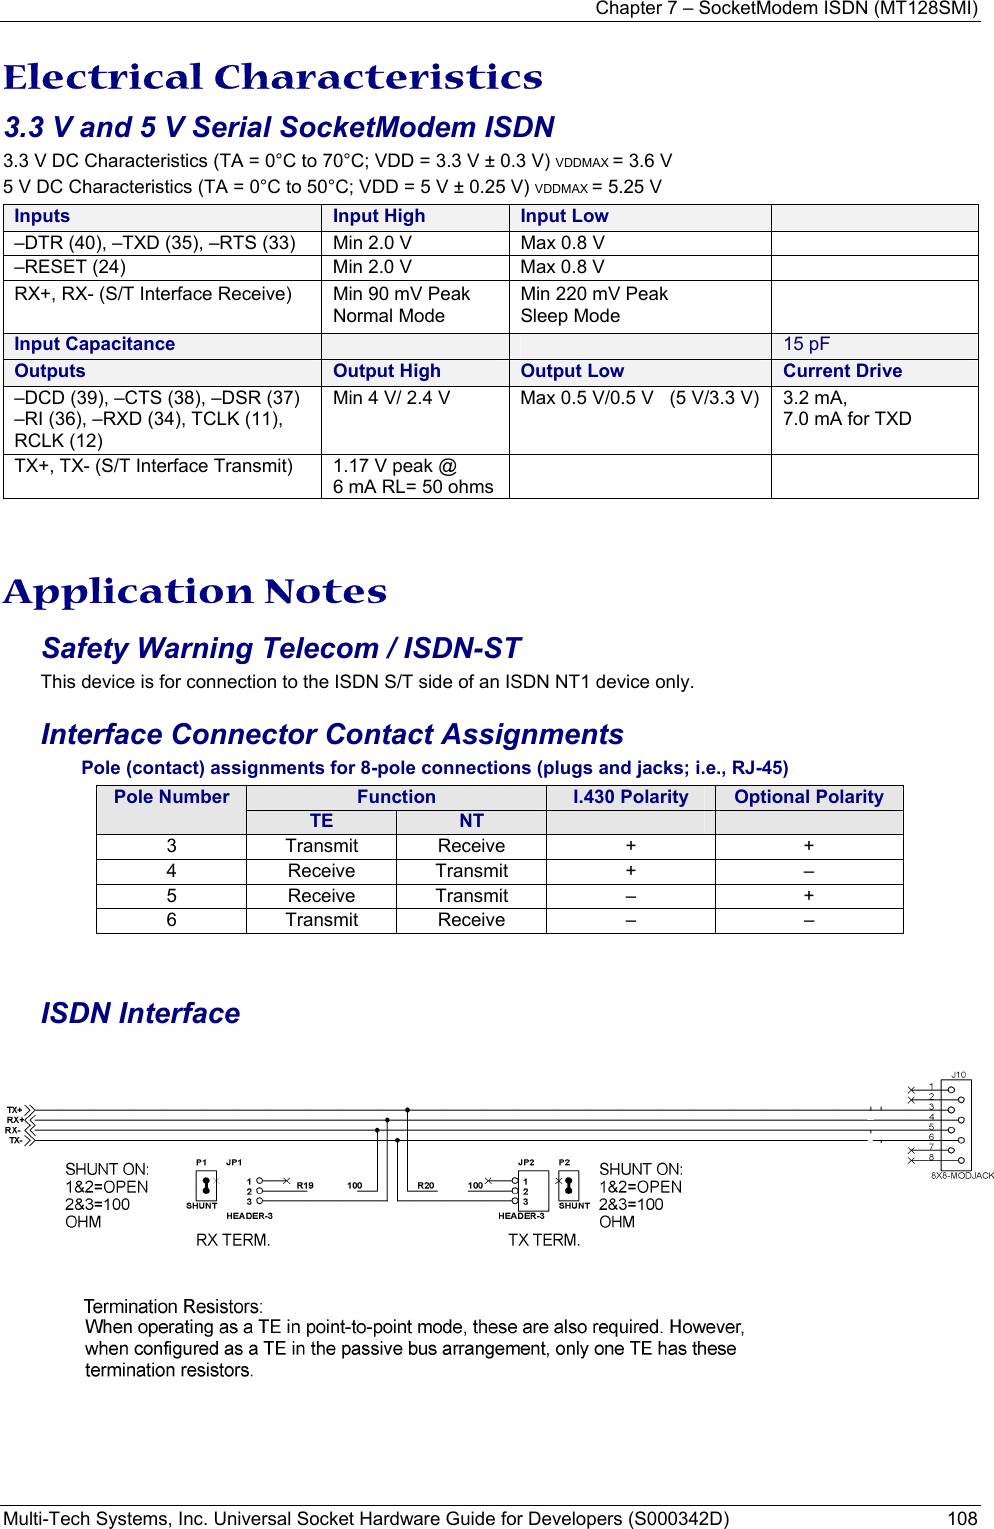 Chapter 7 – SocketModem ISDN (MT128SMI) Multi-Tech Systems, Inc. Universal Socket Hardware Guide for Developers (S000342D)  108 Electrical Characteristics 3.3 V and 5 V Serial SocketModem ISDN 3.3 V DC Characteristics (TA = 0°C to 70°C; VDD = 3.3 V ± 0.3 V) VDDMAX = 3.6 V 5 V DC Characteristics (TA = 0°C to 50°C; VDD = 5 V ± 0.25 V) VDDMAX = 5.25 V Inputs    Input High Input Low  –DTR (40), –TXD (35), –RTS (33)  Min 2.0 V  Max 0.8 V   –RESET (24)  Min 2.0 V  Max 0.8 V    RX+, RX- (S/T Interface Receive)  Min 90 mV Peak   Normal Mode Min 220 mV Peak Sleep Mode  Input Capacitance      15 pF Outputs Output High Output Low Current Drive –DCD (39), –CTS (38), –DSR (37)  –RI (36), –RXD (34), TCLK (11), RCLK (12) Min 4 V/ 2.4 V  Max 0.5 V/0.5 V   (5 V/3.3 V)  3.2 mA,  7.0 mA for TXD TX+, TX- (S/T Interface Transmit)  1.17 V peak @  6 mA RL= 50 ohms     Application Notes Safety Warning Telecom / ISDN-ST This device is for connection to the ISDN S/T side of an ISDN NT1 device only. Interface Connector Contact Assignments                Pole (contact) assignments for 8-pole connections (plugs and jacks; i.e., RJ-45) Function  I.430 Polarity  Optional Polarity Pole Number TE  NT     3 Transmit Receive  +  + 4 Receive Transmit  +  – 5 Receive Transmit  –  + 6 Transmit Receive  –  –   ISDN Interface   